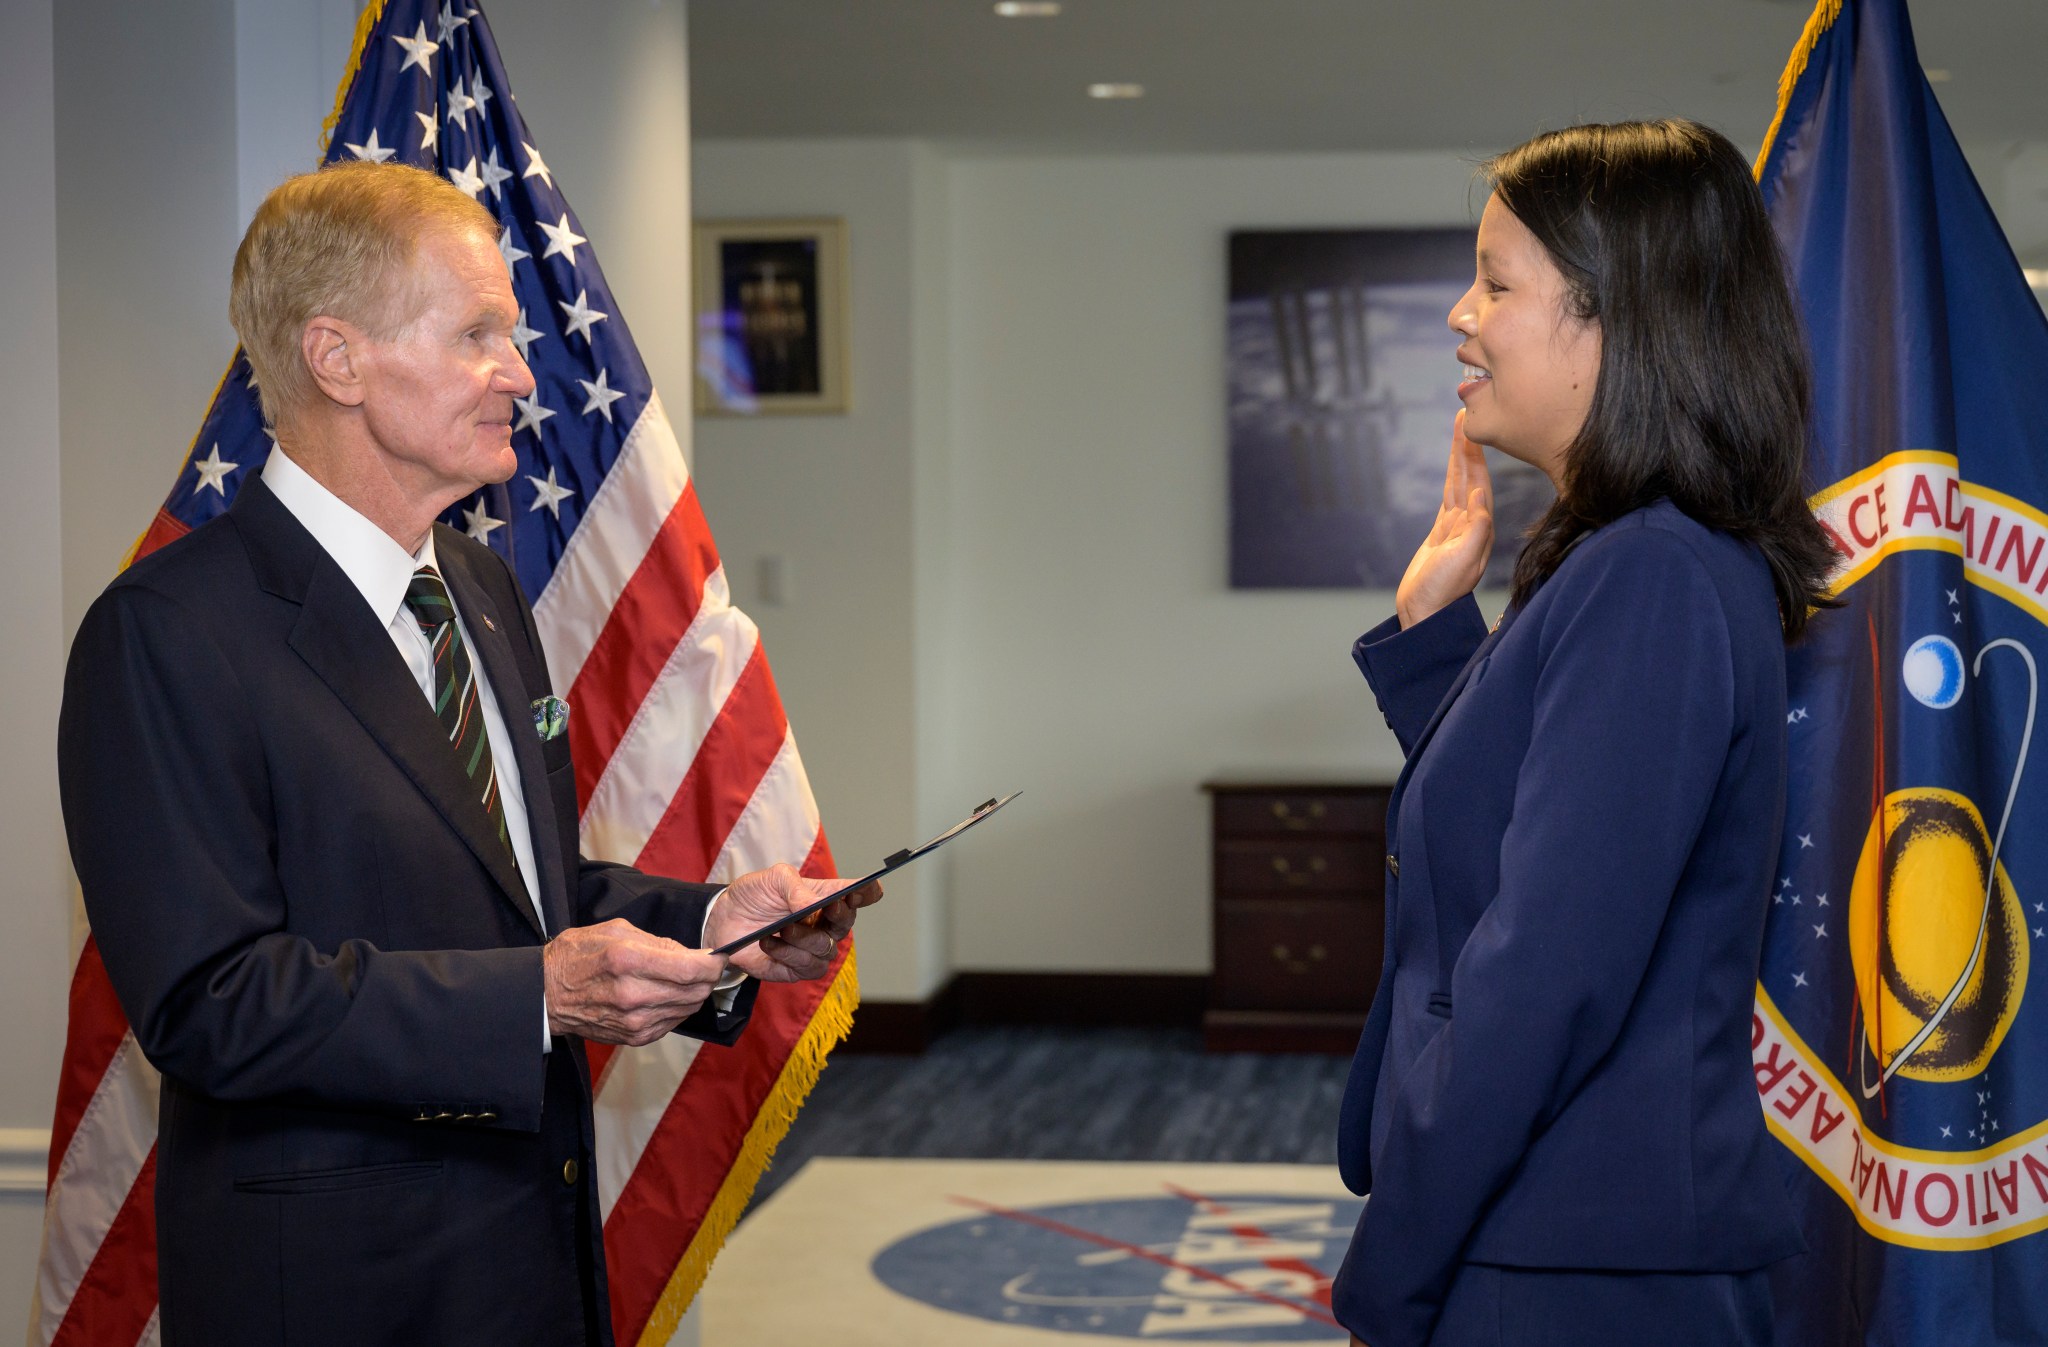 NASA Administrator Bill Nelson, left, swears in Margaret Vo Schaus as NASA's Chief Financial Officer, Wednesday, Aug. 4, 2021, at the Mary W. Jackson NASA Headquarters building in Washington.